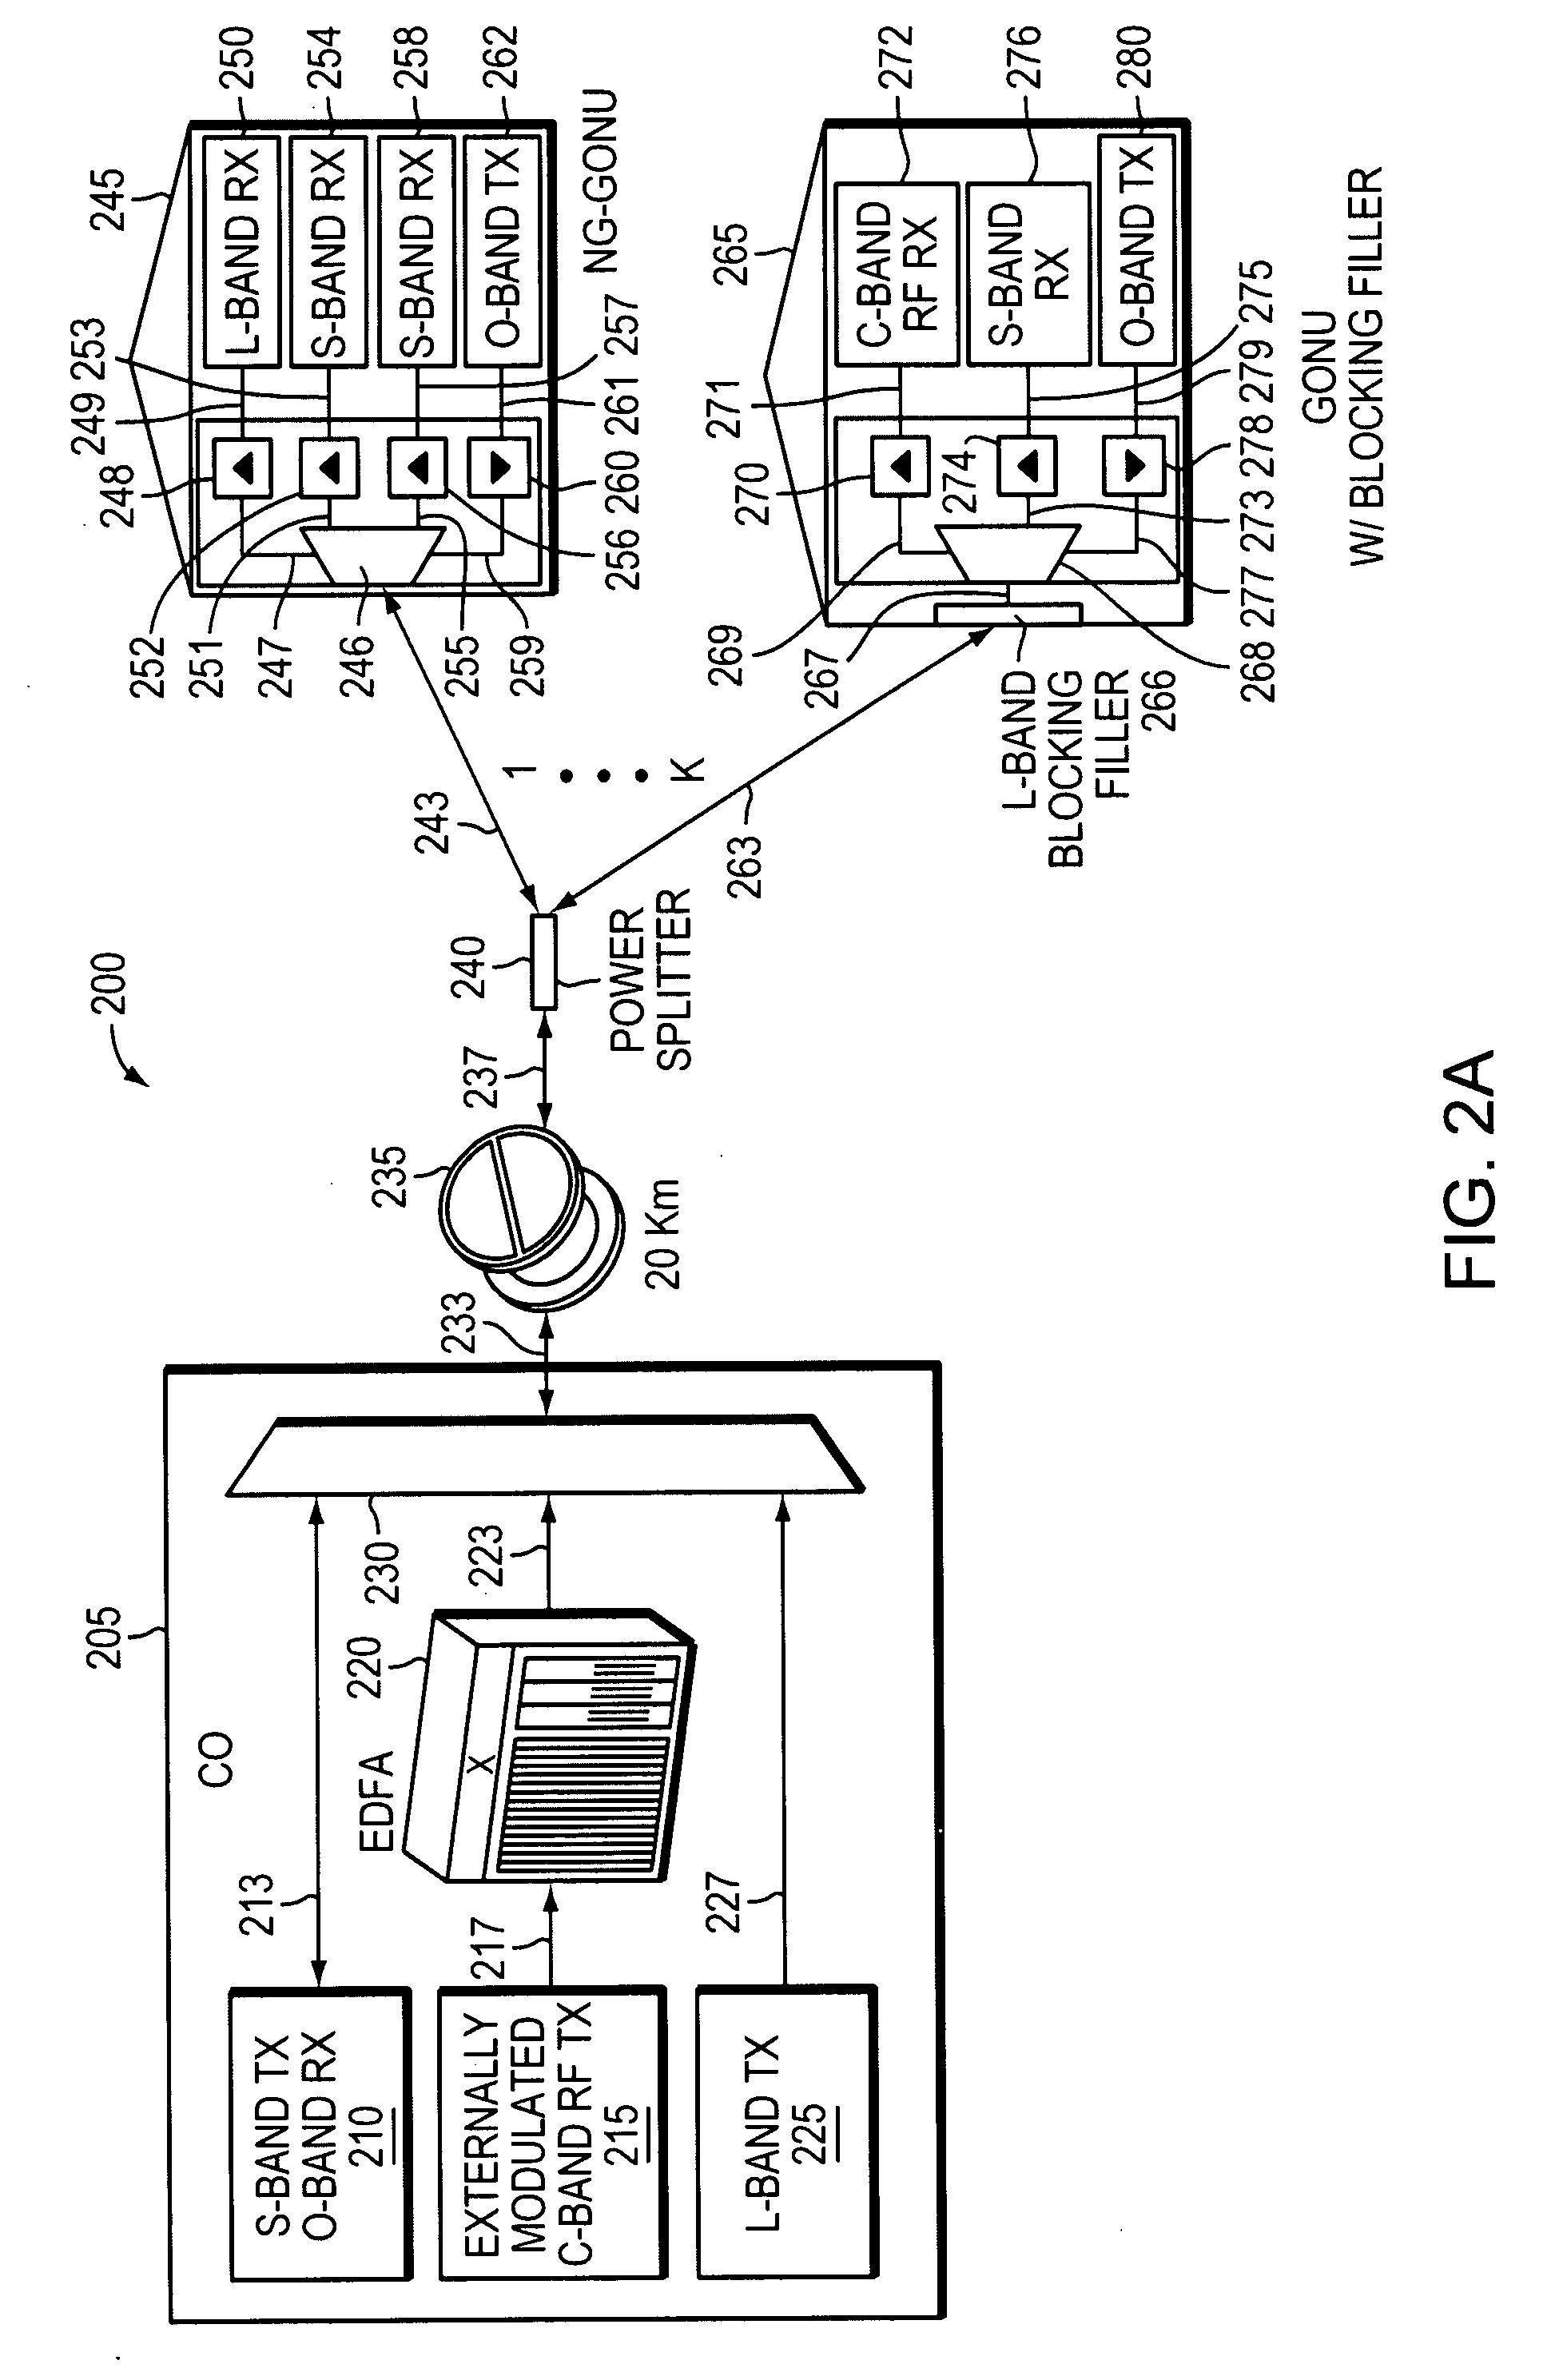 Methods and apparatus for upgrading passive optical networks